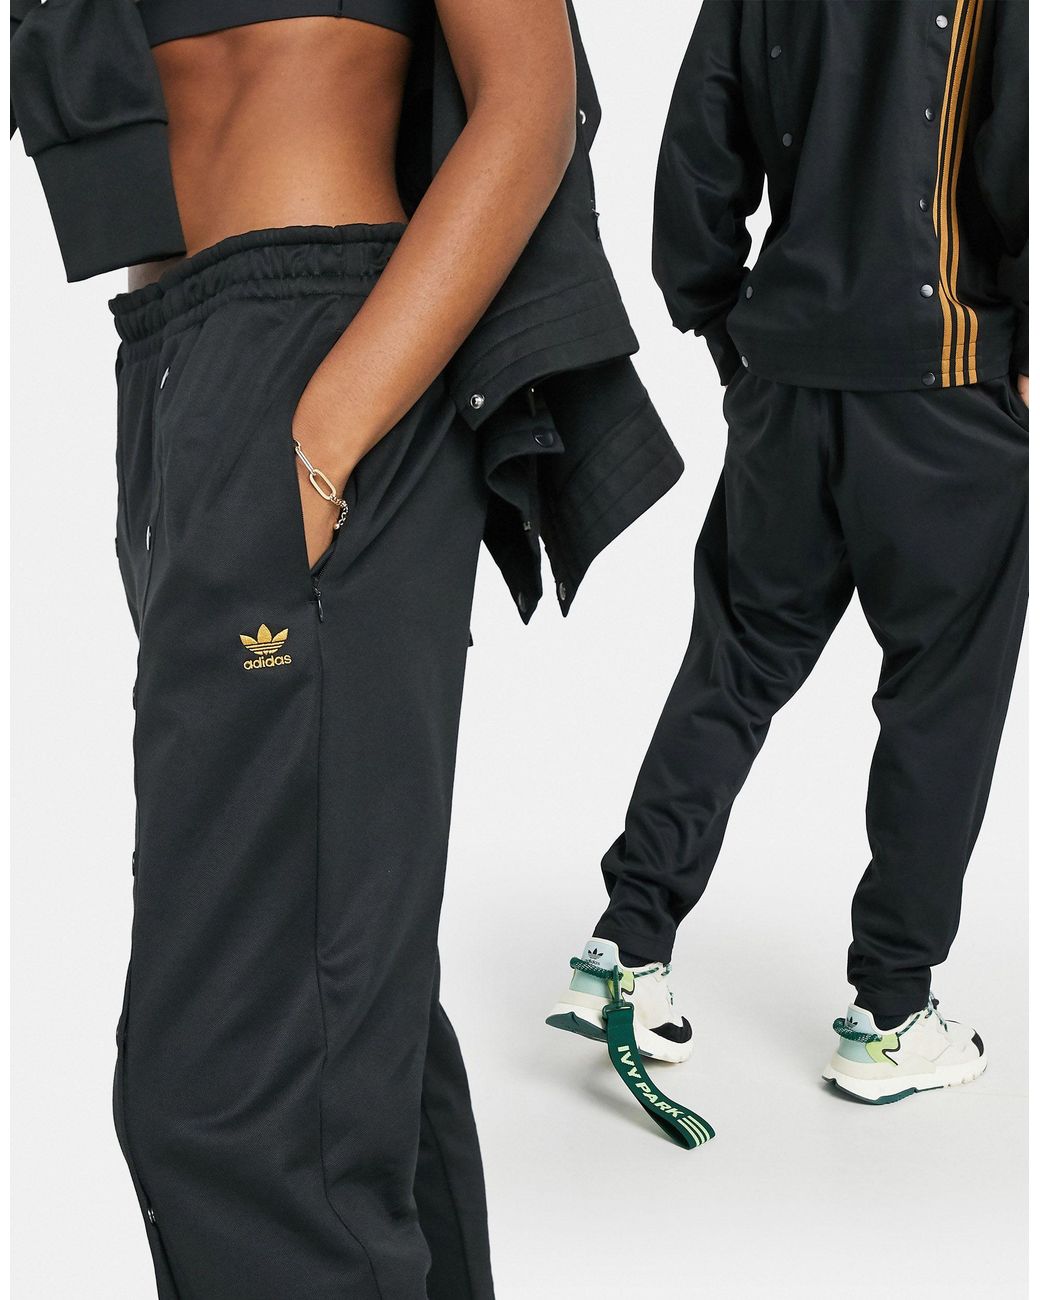 Ivy Park Adidas X Track Pants in Black | Lyst Canada